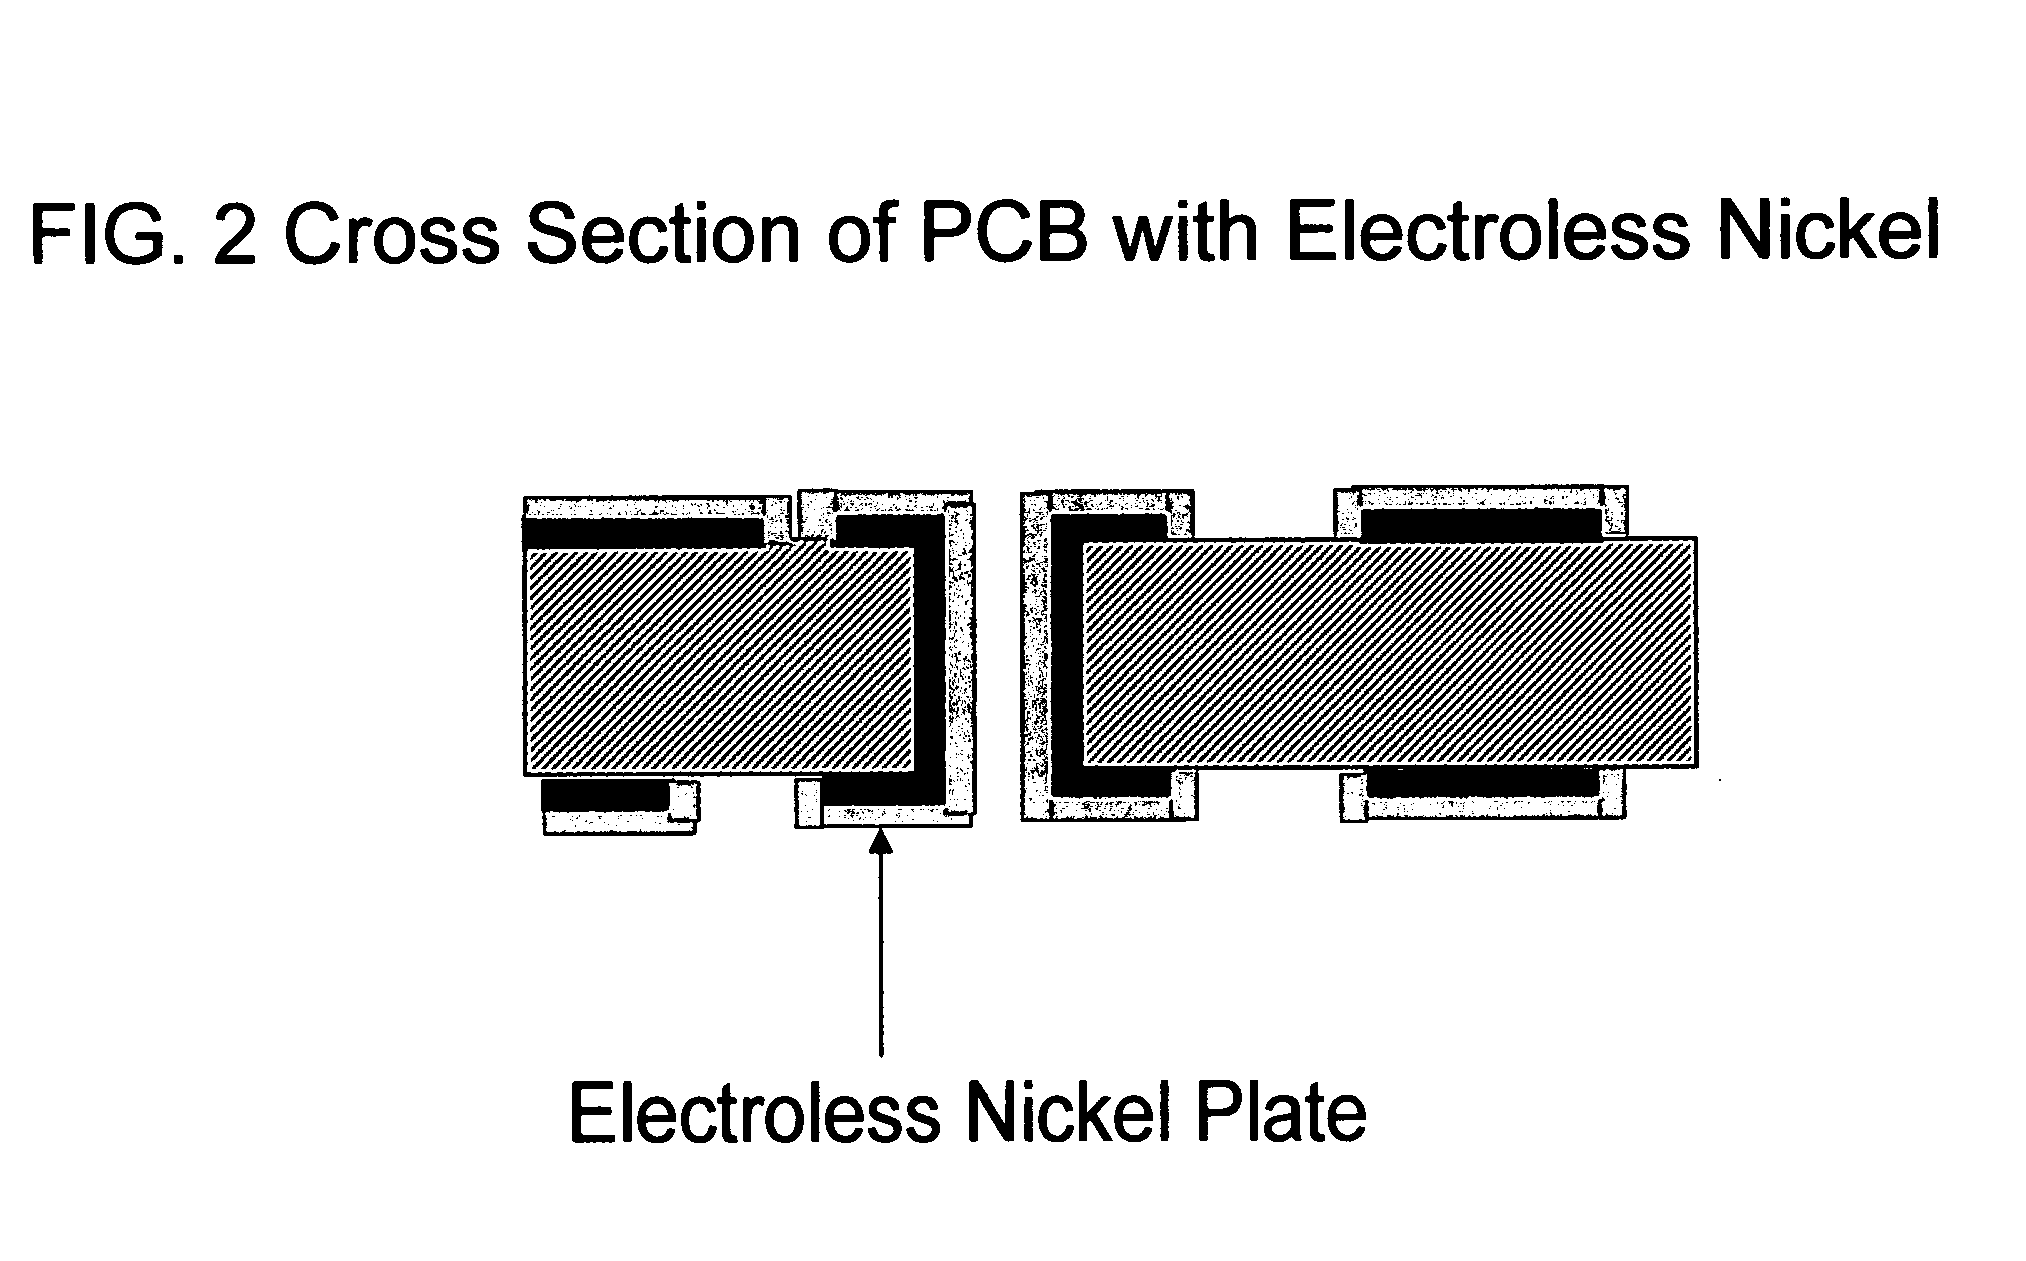 Combined solderable multi-purpose surface finishes on circuit boards and method of manufacture of such boards